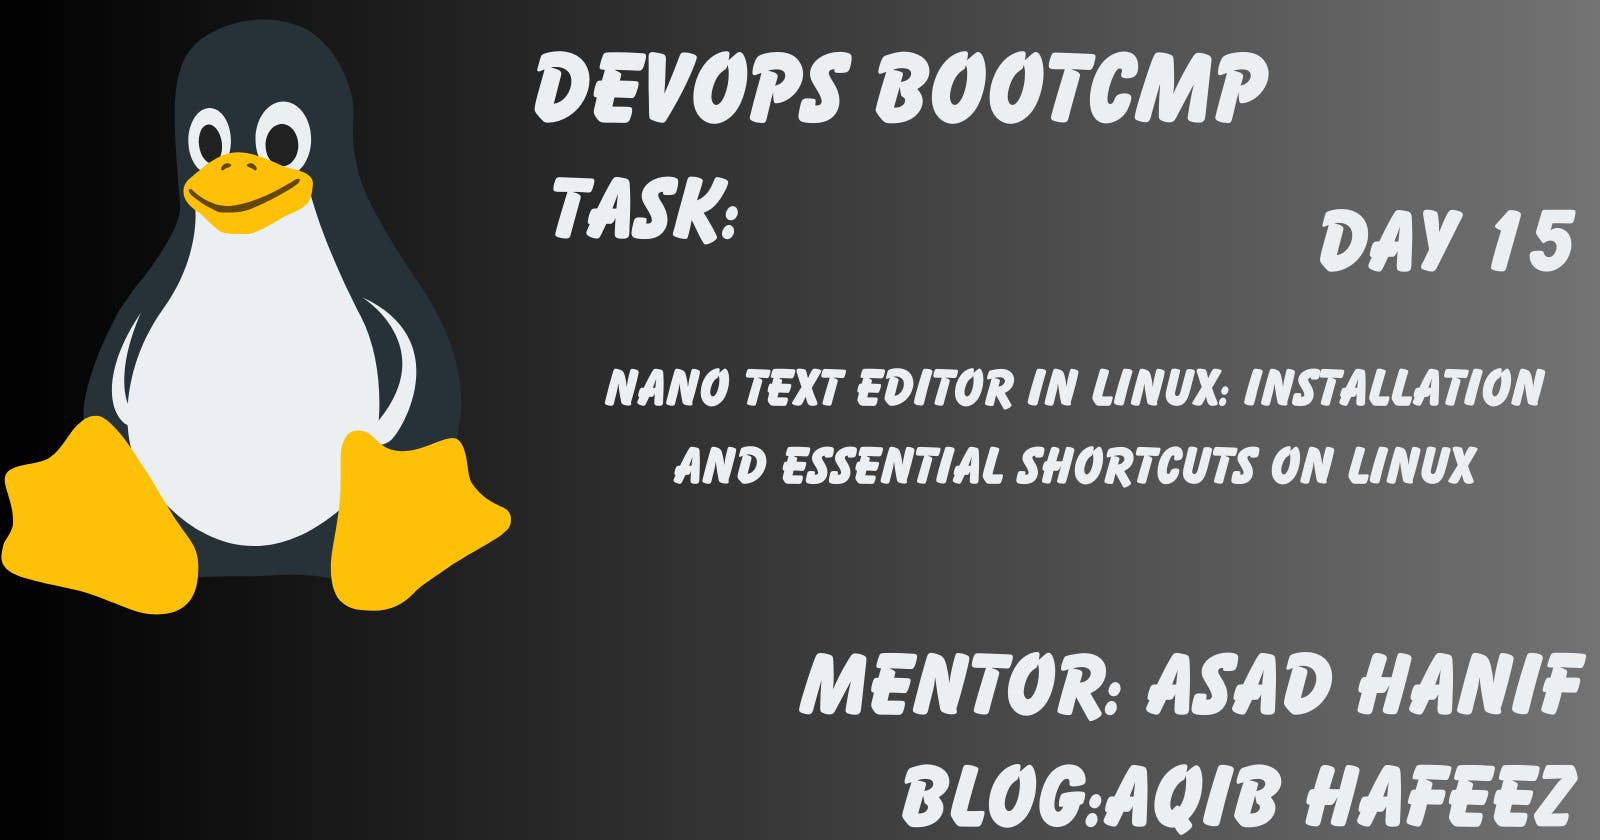 Introduction to Nano Text Editor in Linux, Its Role in DevOps, Installation on Ubuntu, CentOS, and RHEL, and Essential Shortcut Keys